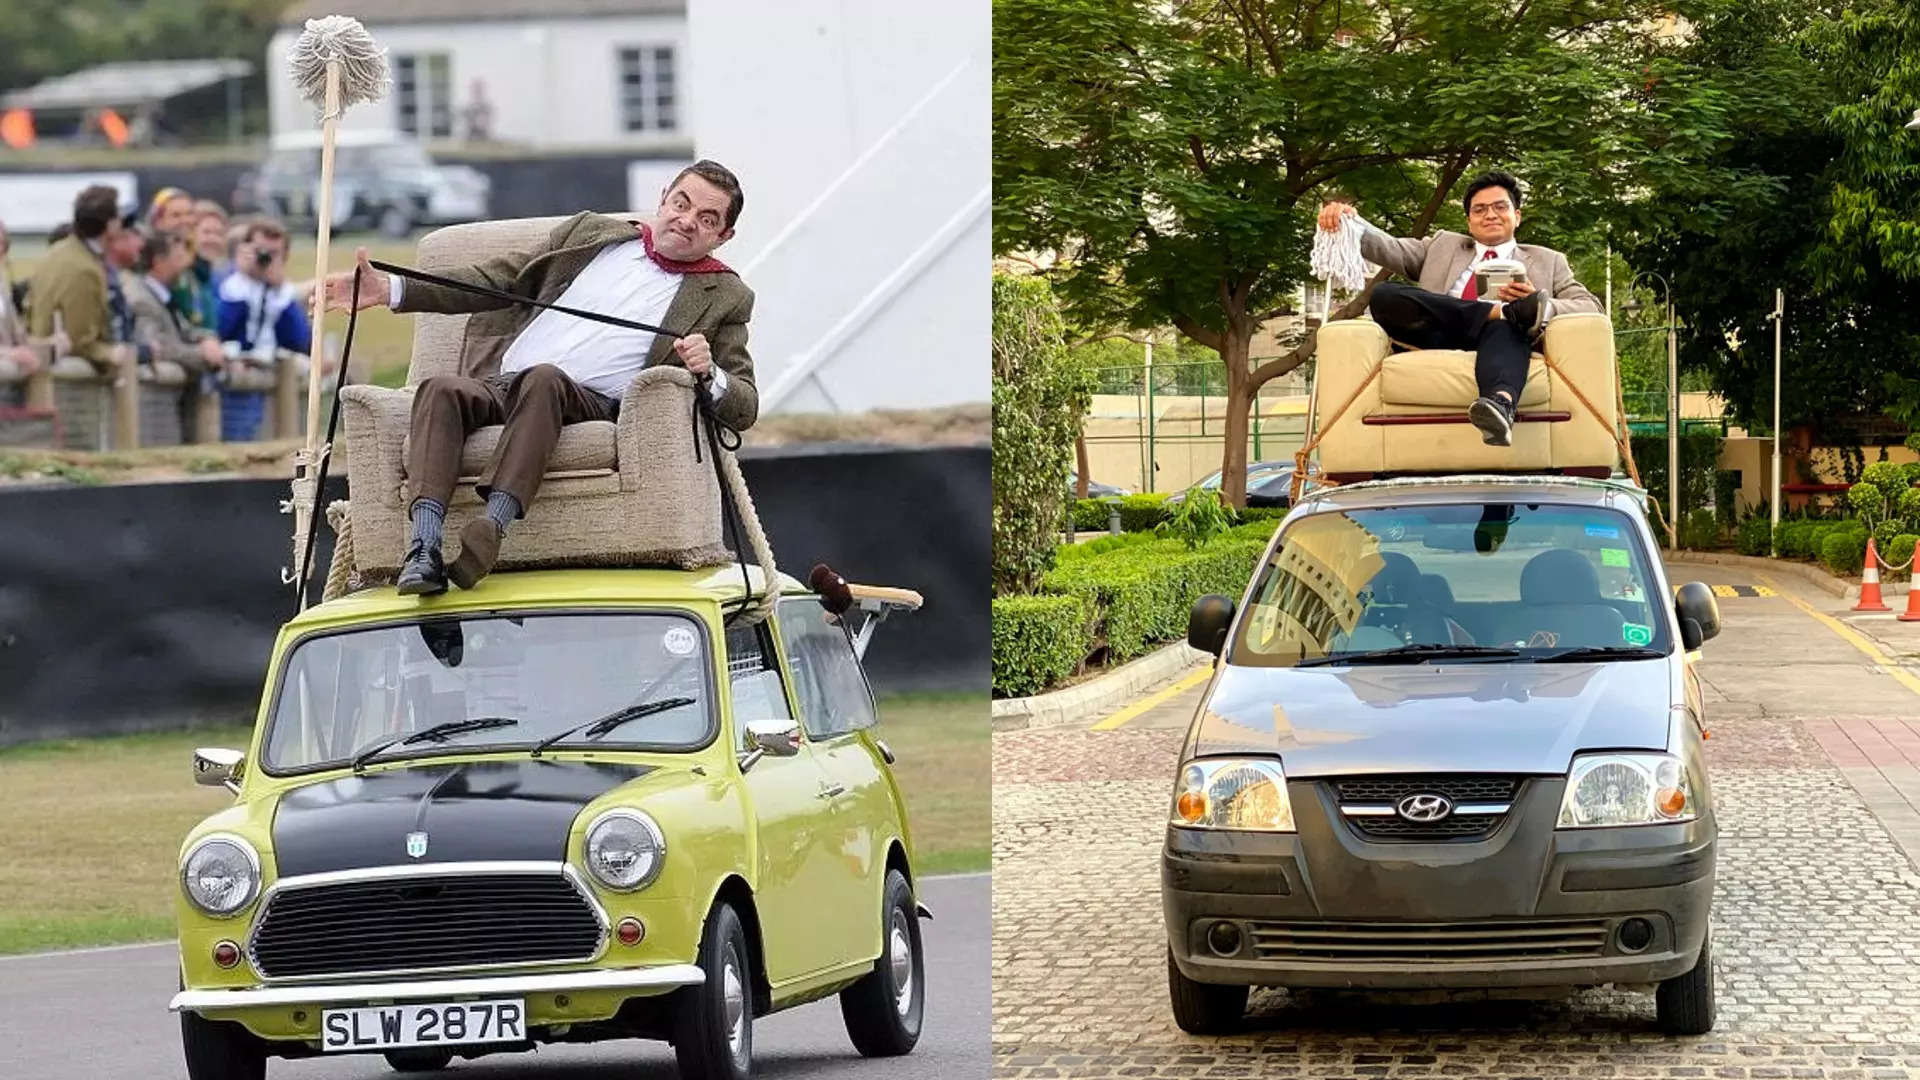 Mr Beans car which is imitated by this Gurgaon Car